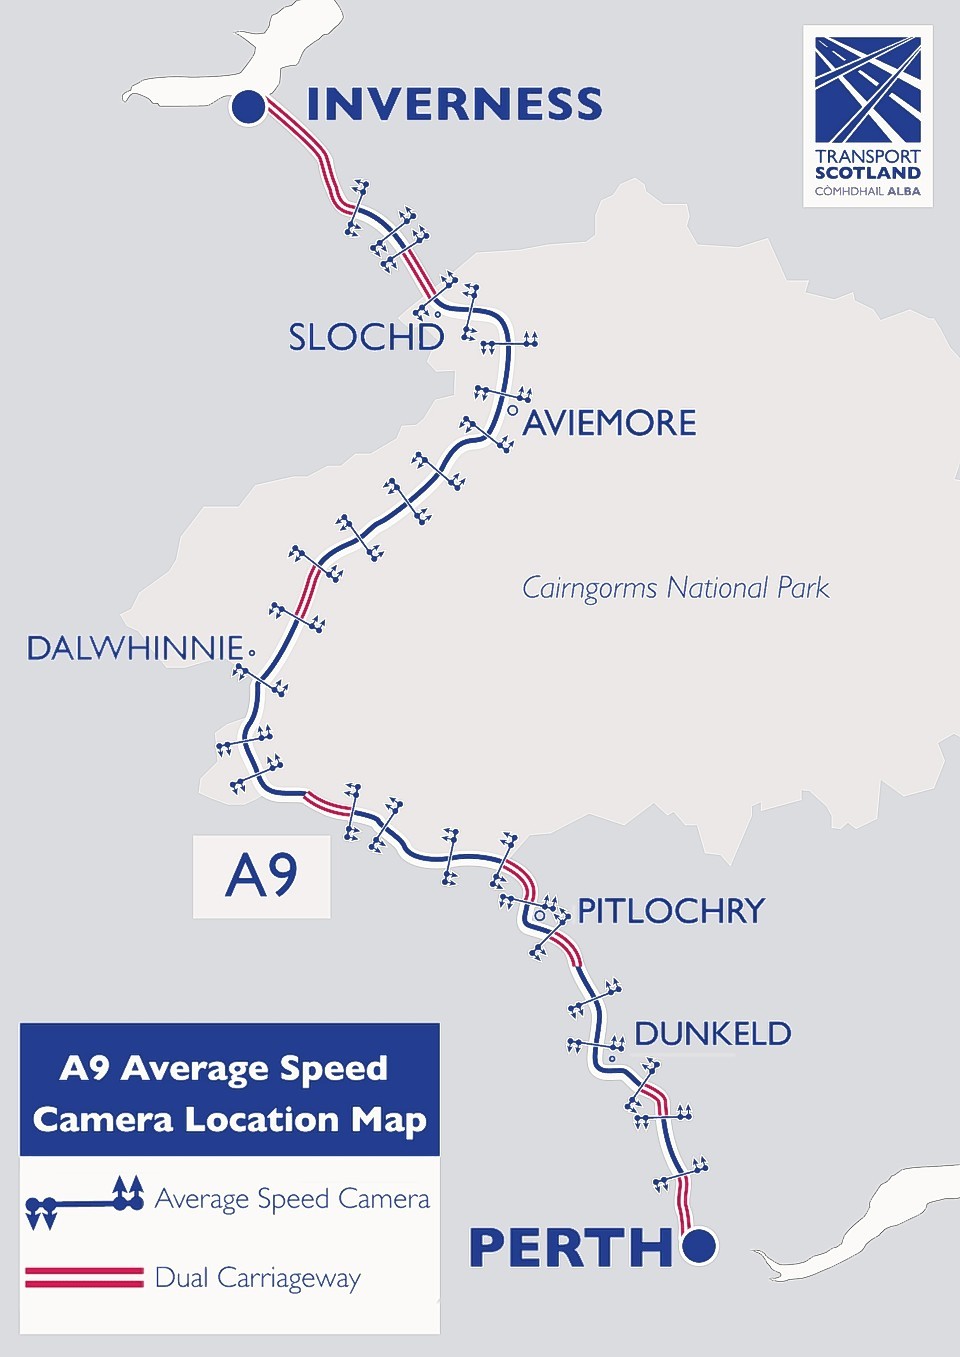 This map shows the rough placement of the average speed cameras along the A9